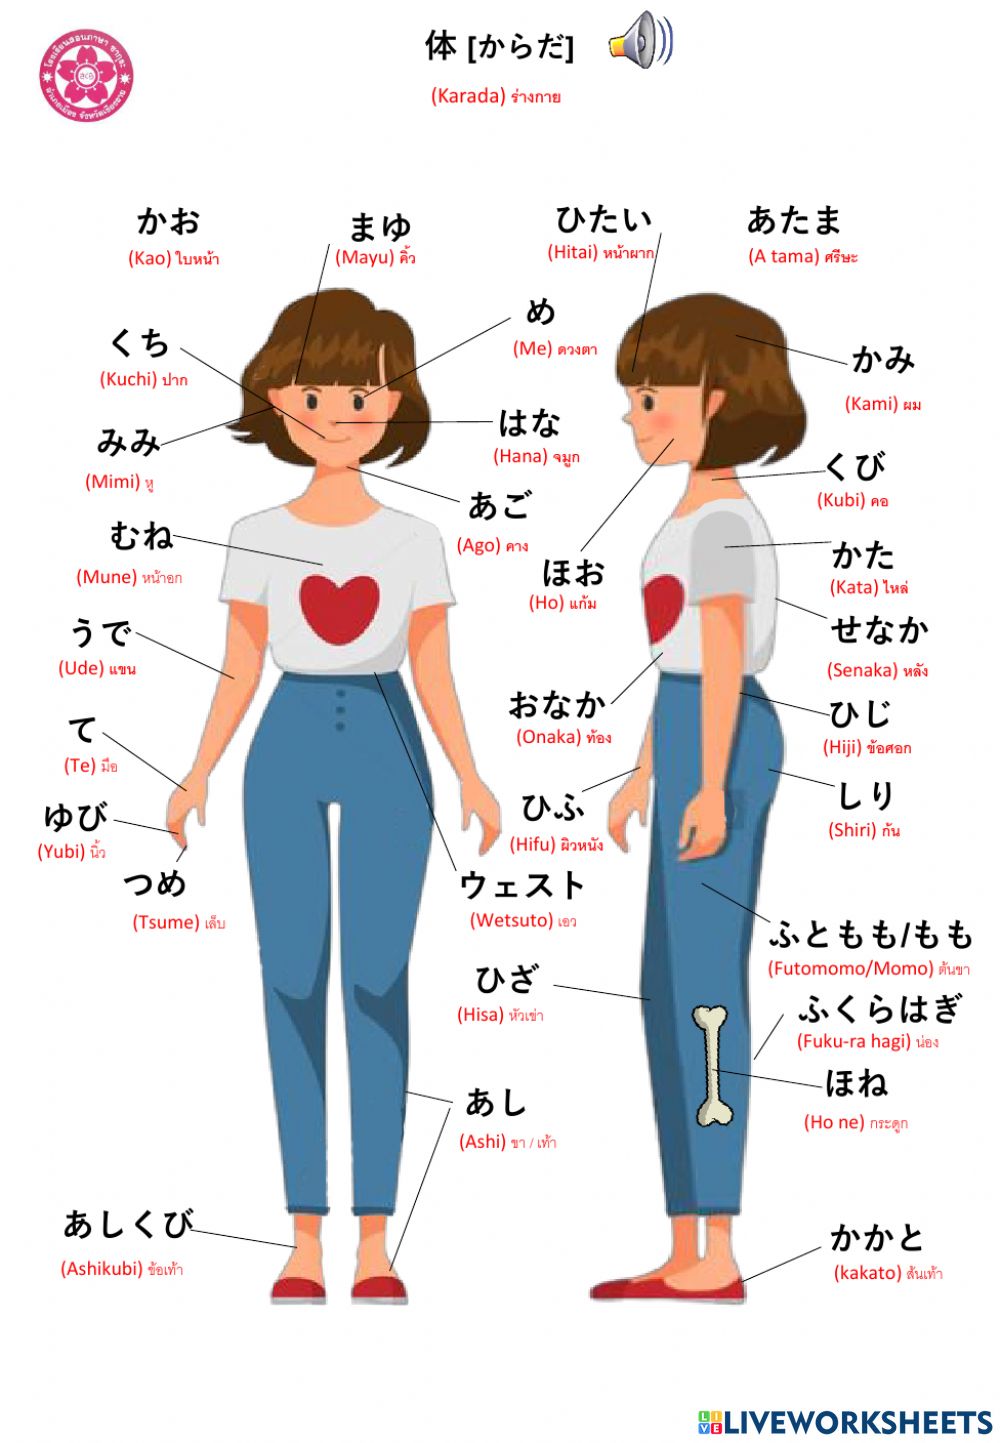 Body Parts in Japanese with English Translations – ボデいパーツ